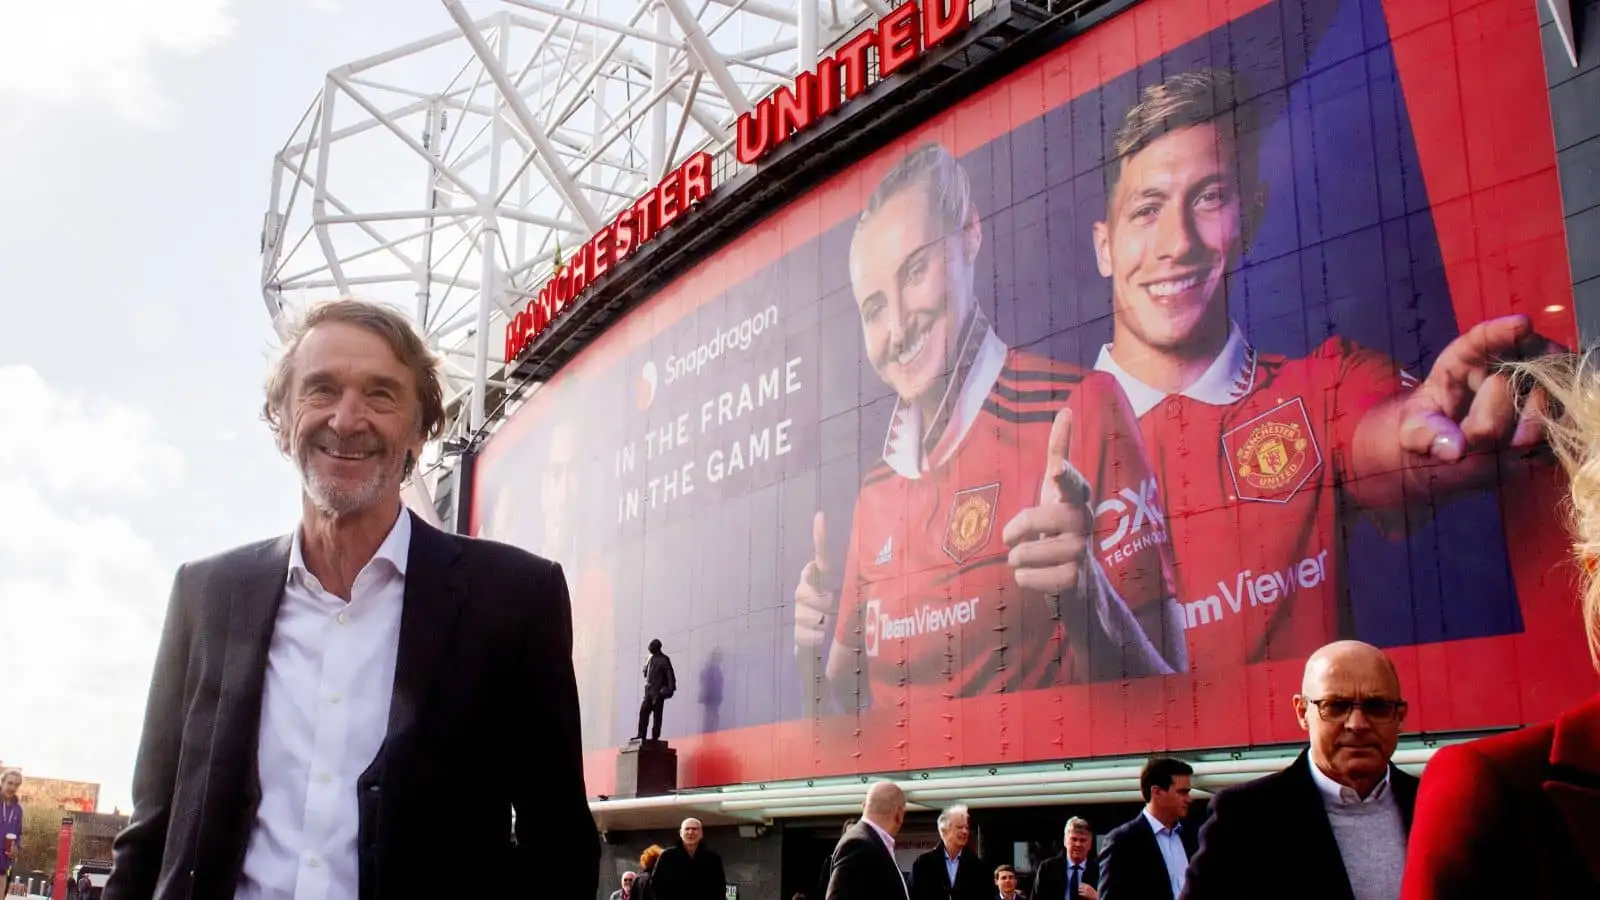 Sir Jim Ratcliffe is buying a £1.4bn share of Manchester United